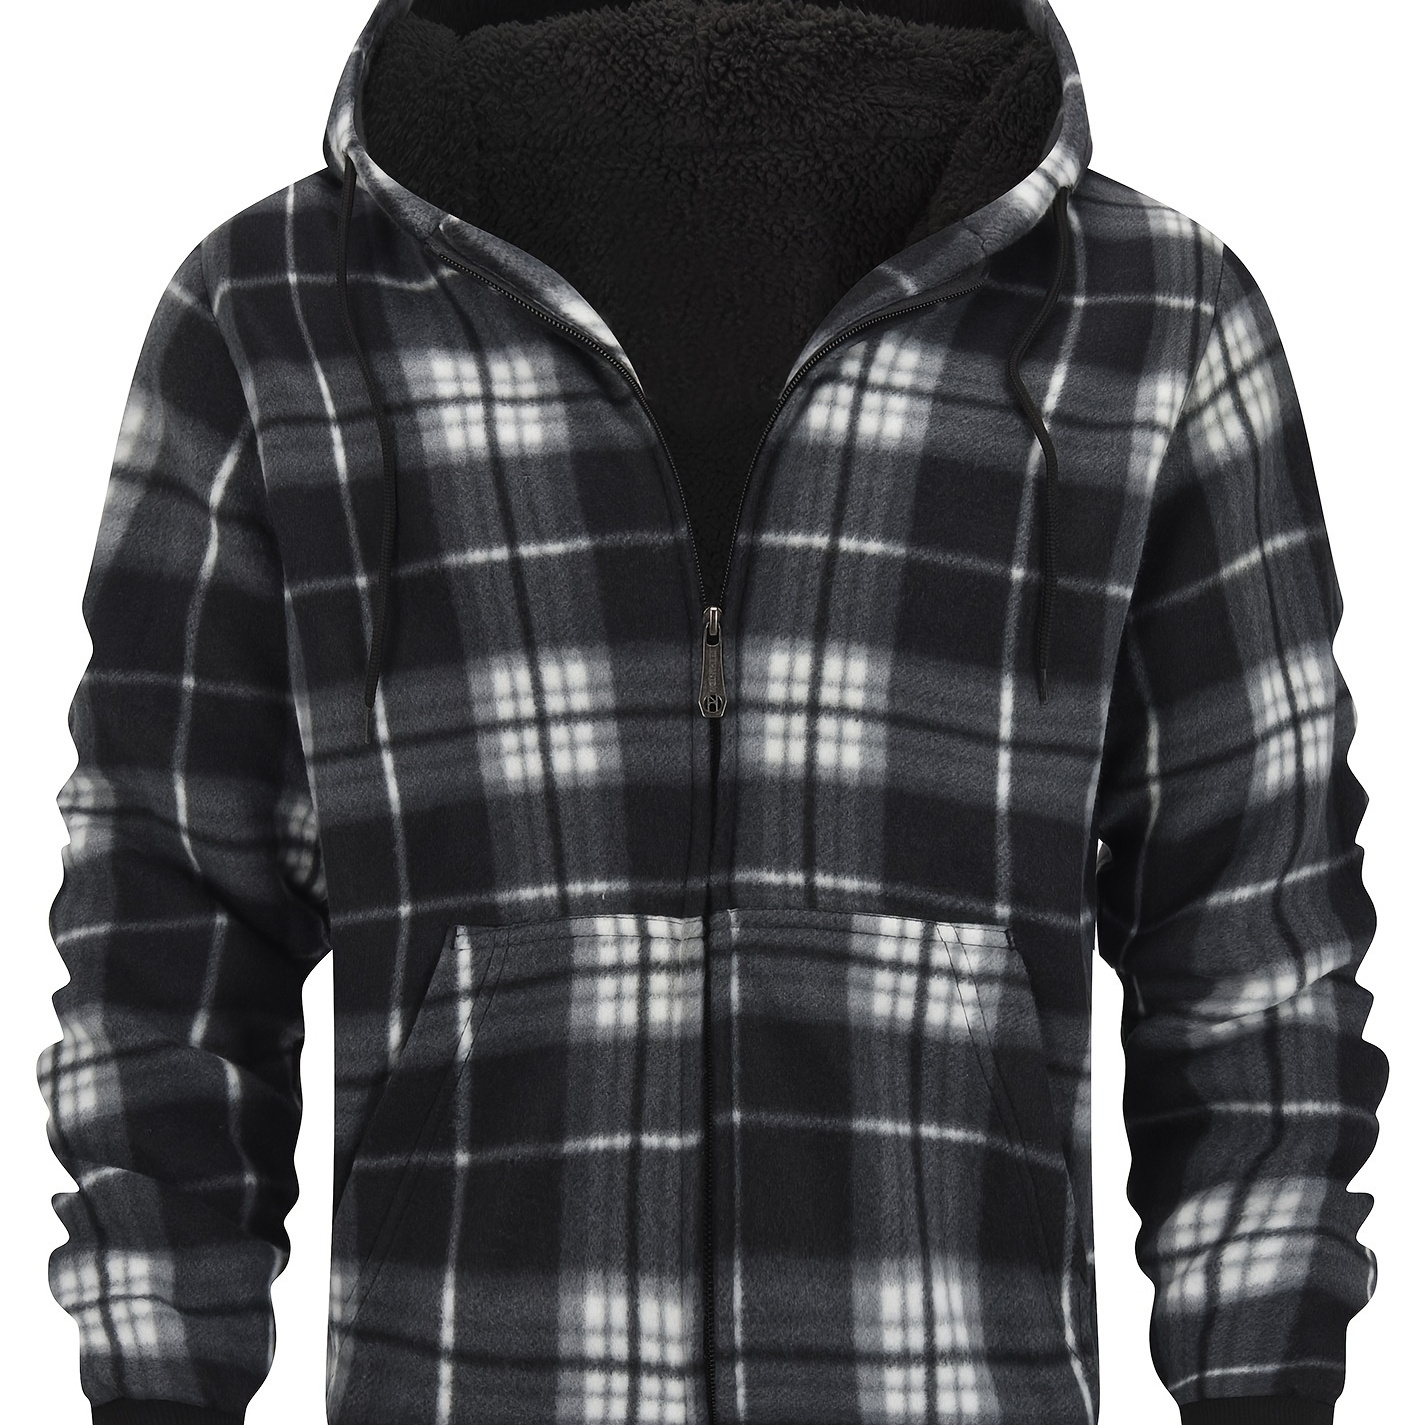 

Retro Plaid Sherpa Lined Men's Warm Thick Hooded Jacket Casual Long Sleeve Hoodies With Zipper Gym Sports Hooded Coat For Spring Fall